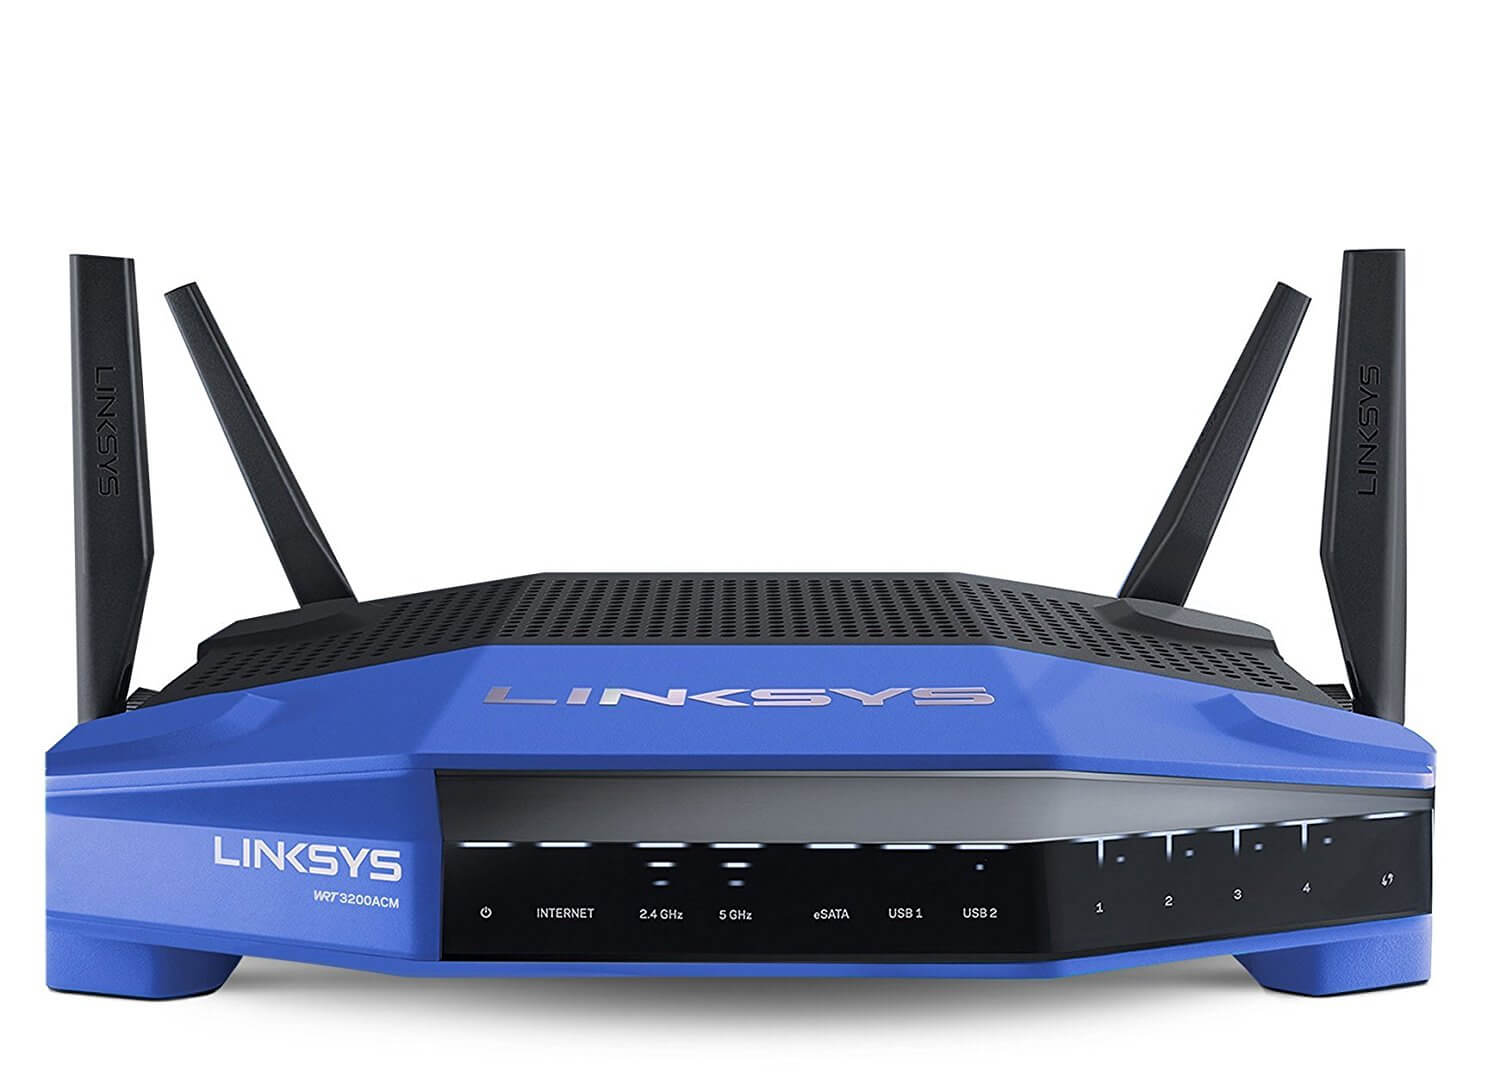 Linksys WRT AC3200 router